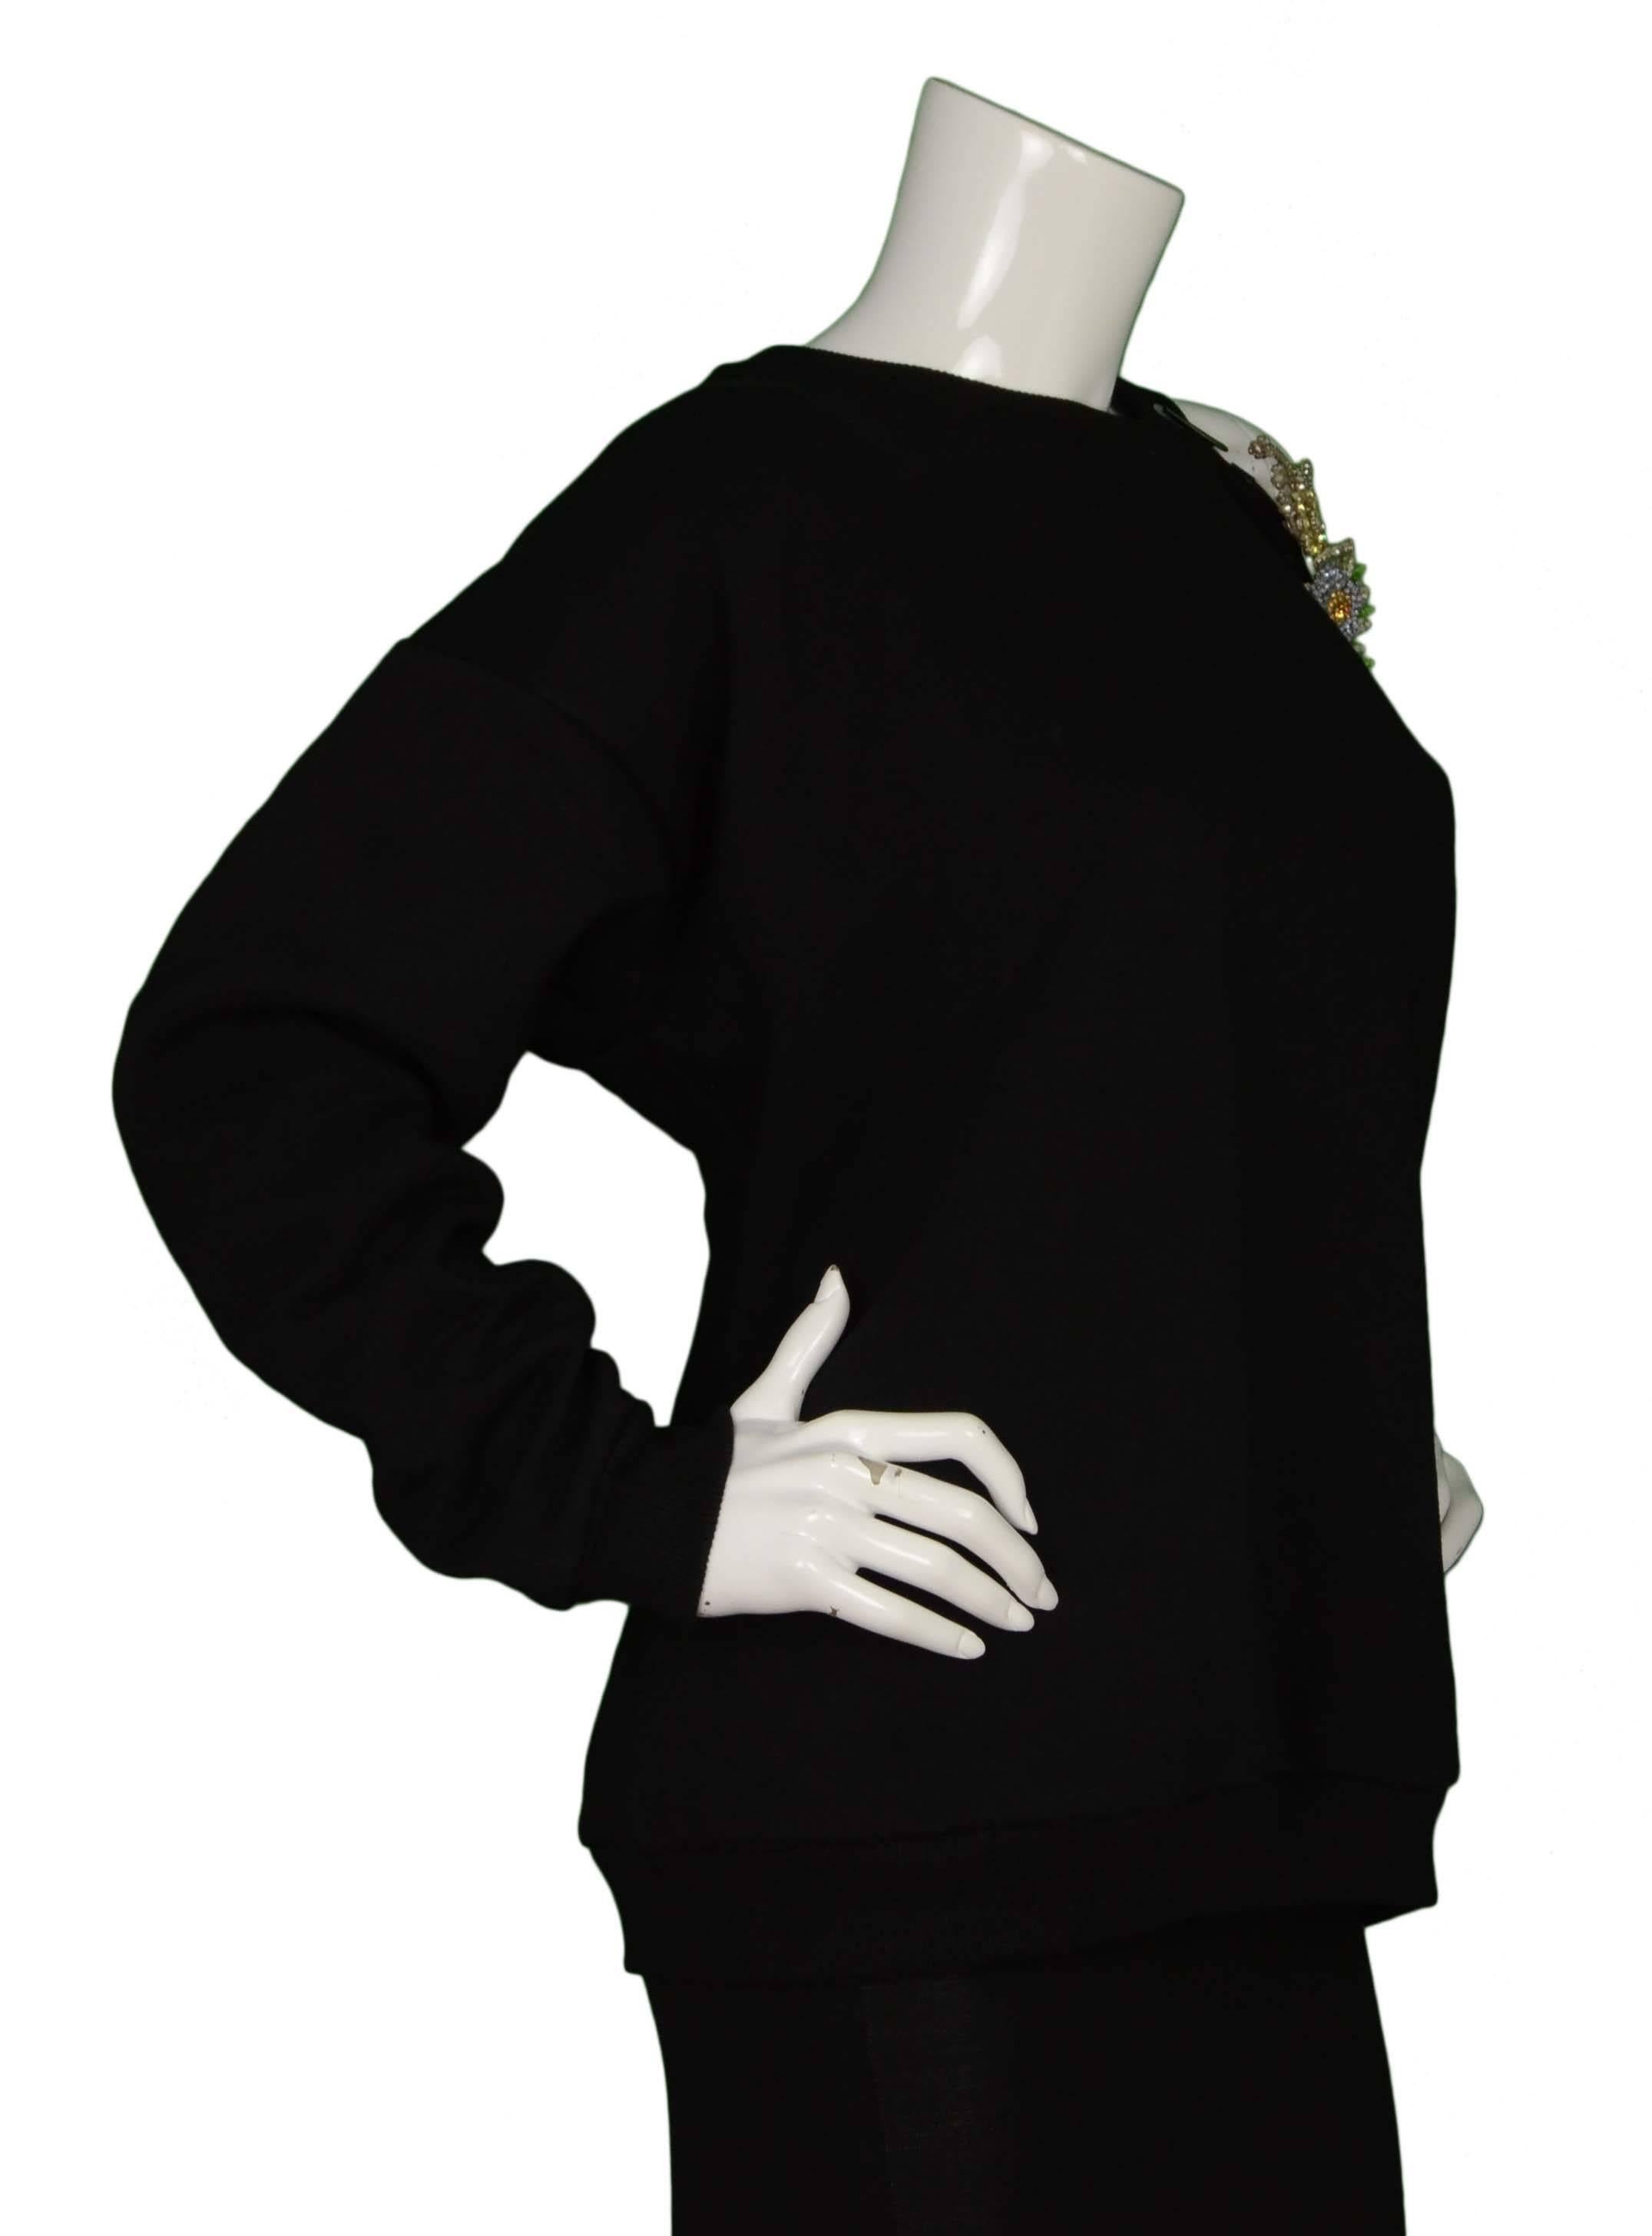 Christopher Kane Black Cotton & Rhinestone Cut Out Sweatshirt 
Features multi-colored rhinestone floral appliques at cut out shoulder
Made In: Italy
Color: Black and multi-color
Composition: 70% cotton, 30% polyester
Lining: 90% cotton, 10%